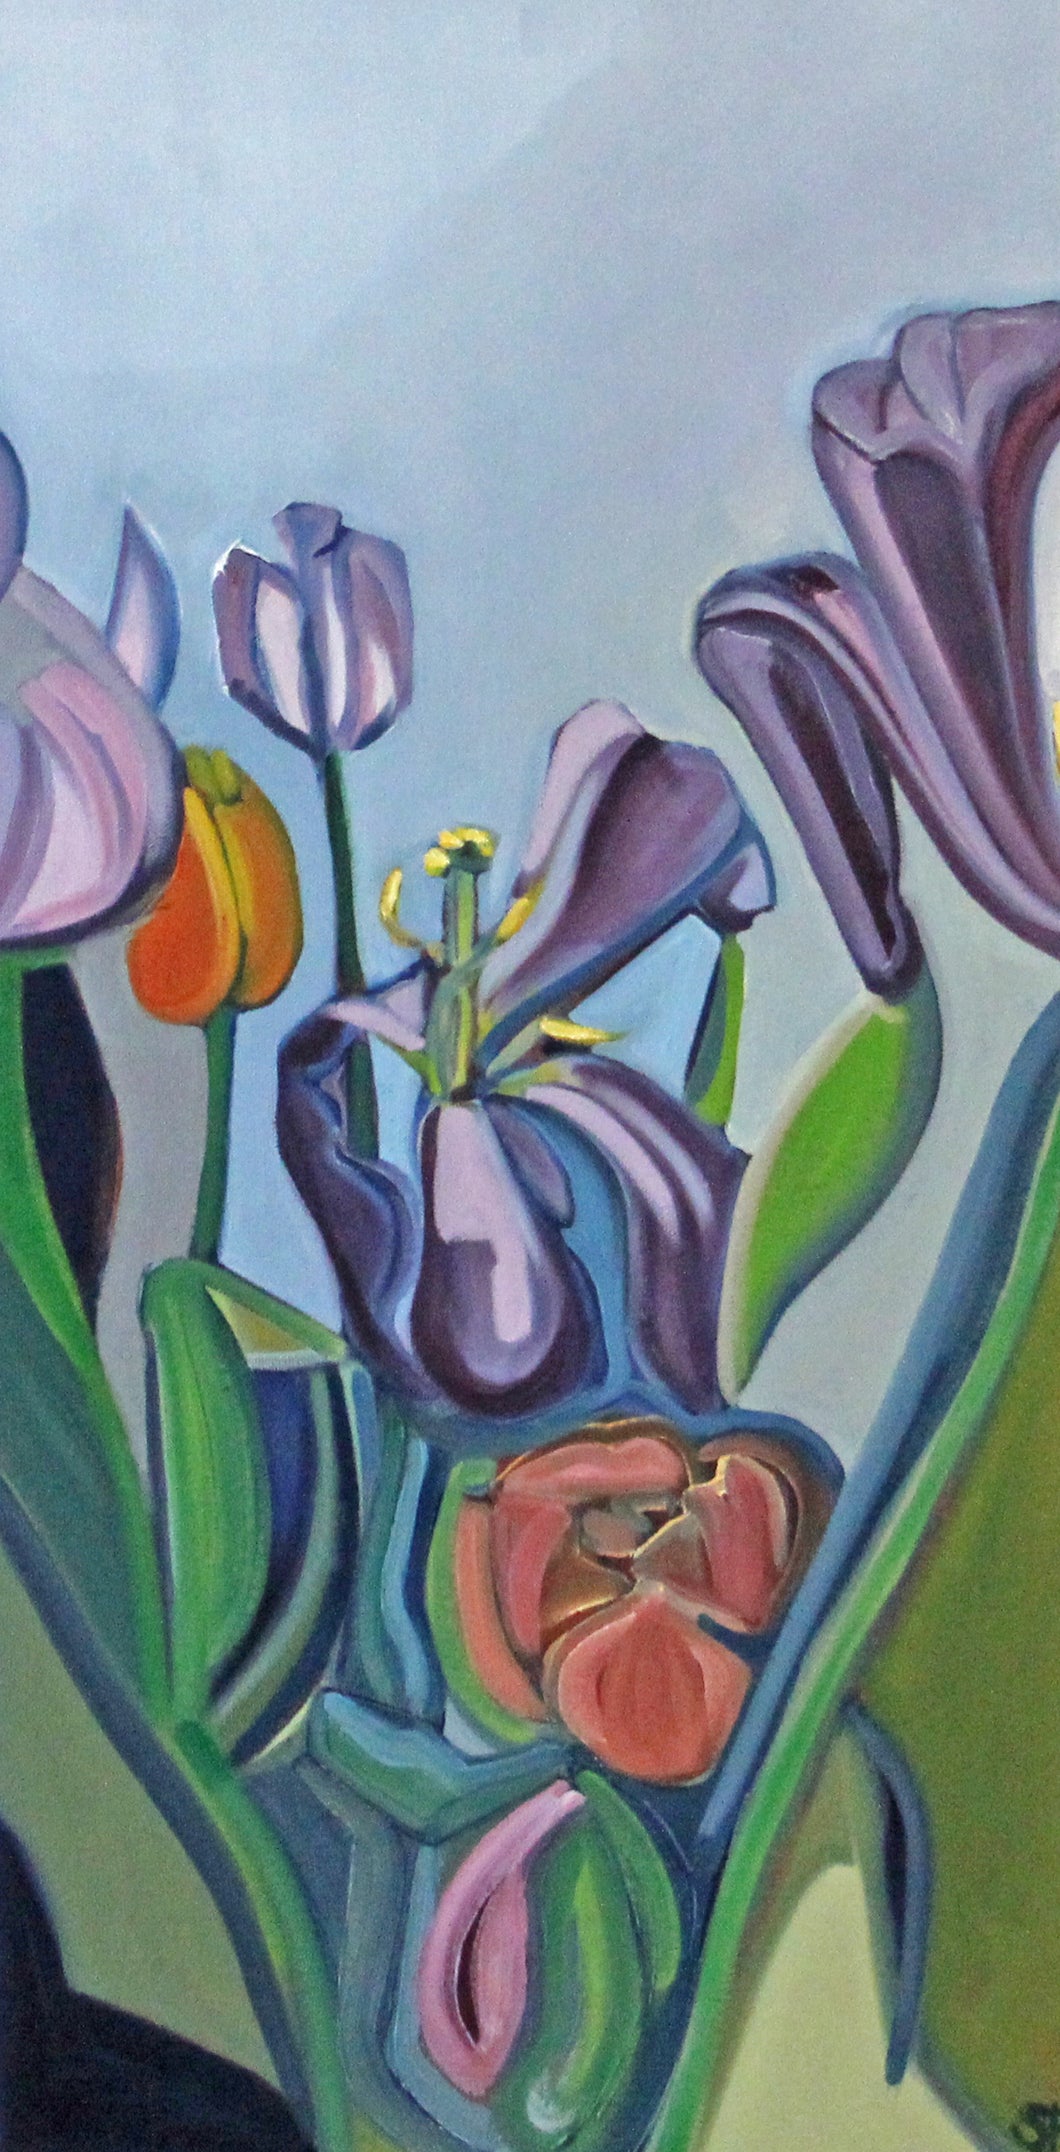 Through the Tulips - Mounted Print